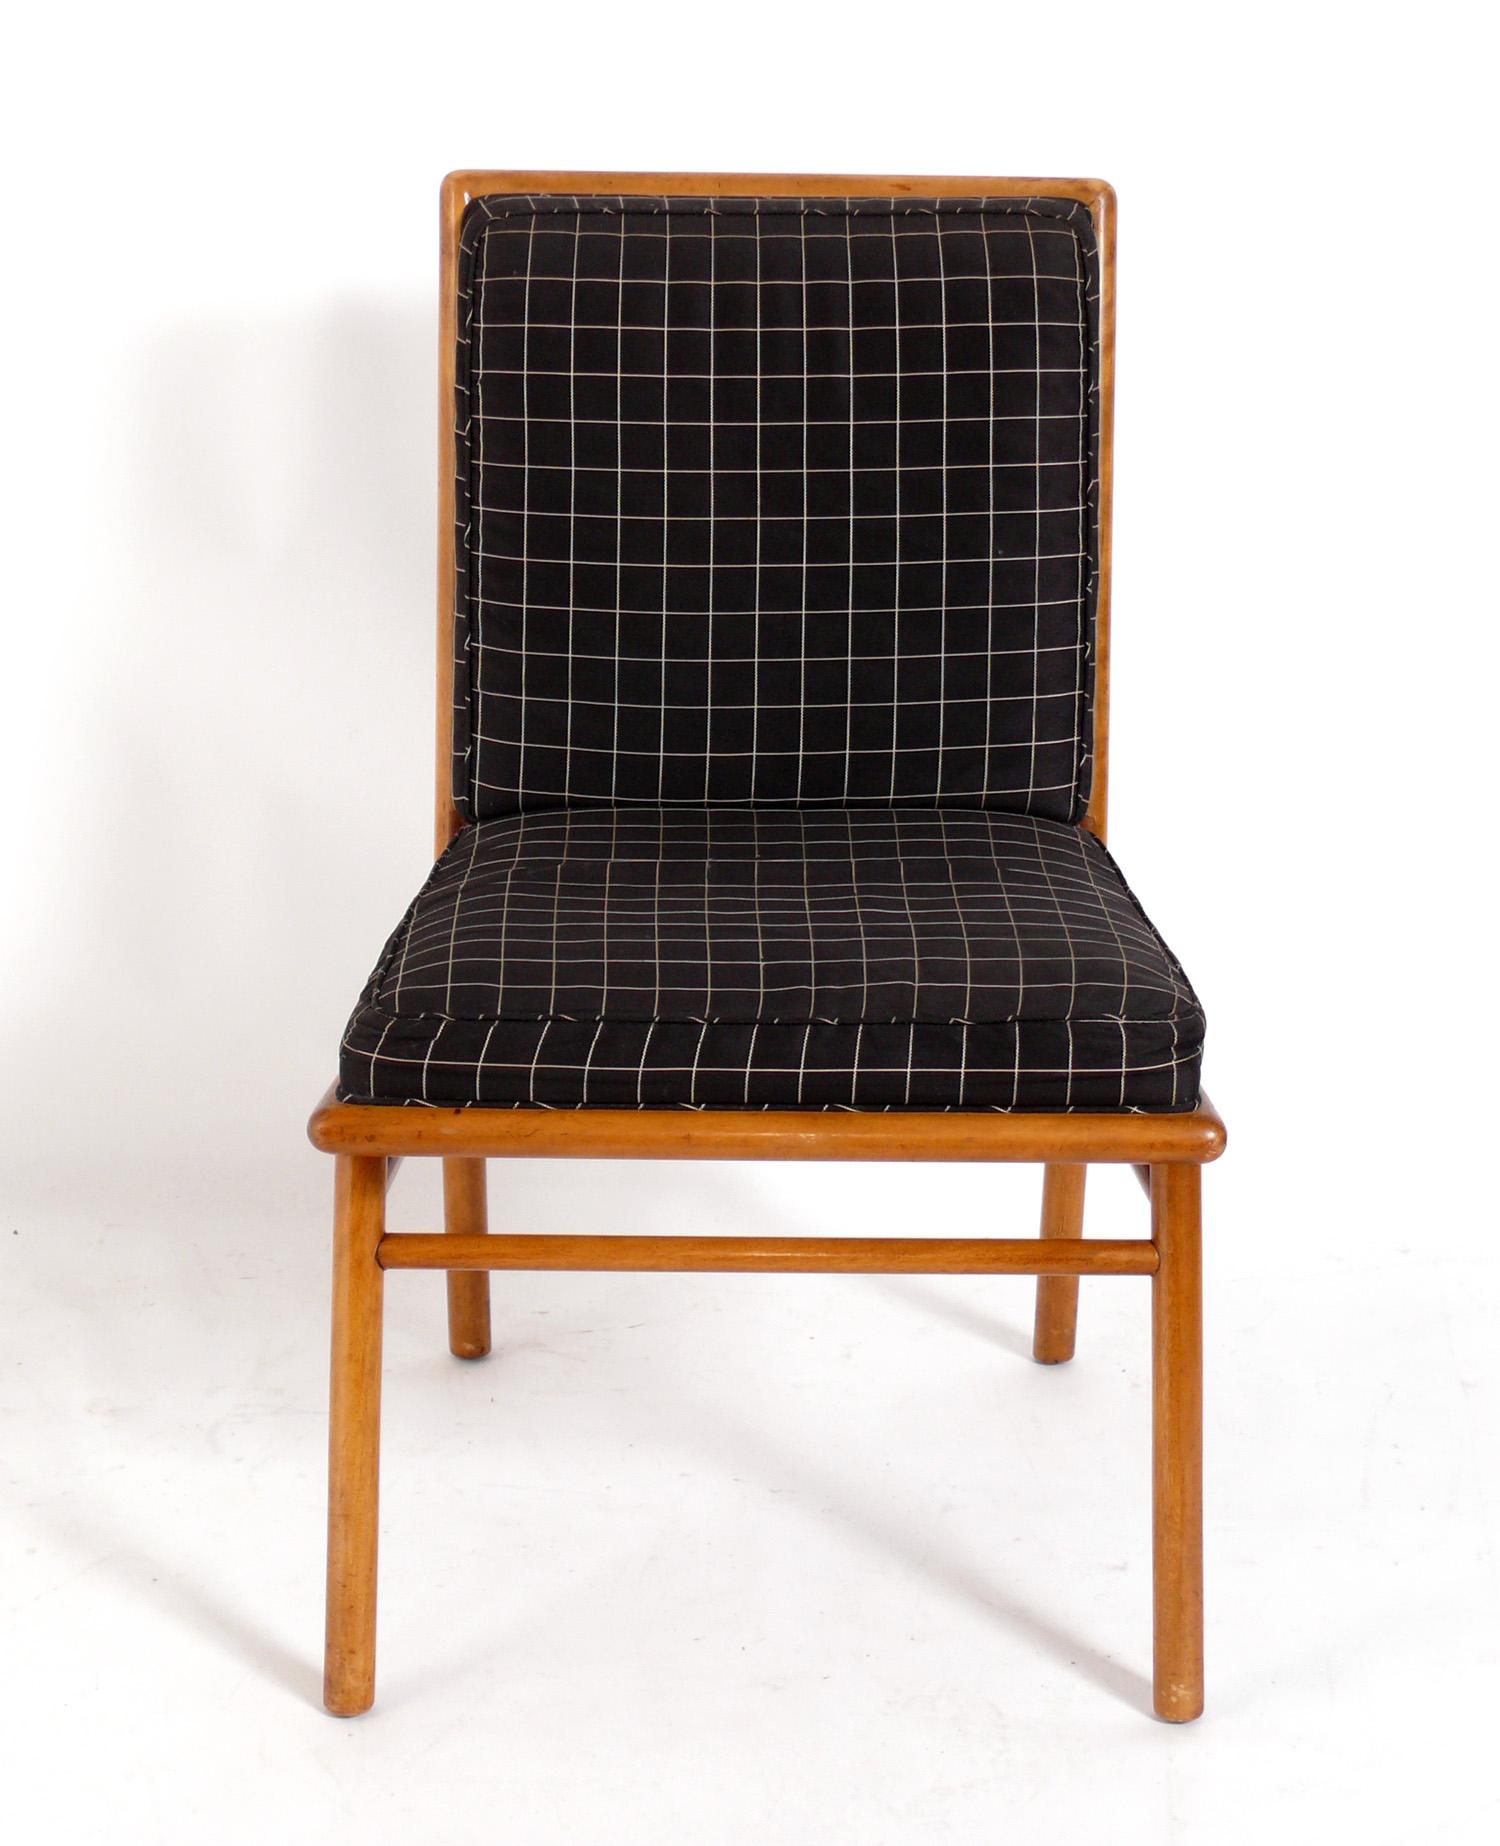 Set of Four Clean Lined Mid Century Dining Chairs, designed by T.H. Robsjohn Gibbings for Widdicomb, American, circa 1950s. These dining chairs are currently being refinished and reupholstered and can be completed in your choice of wood finish color